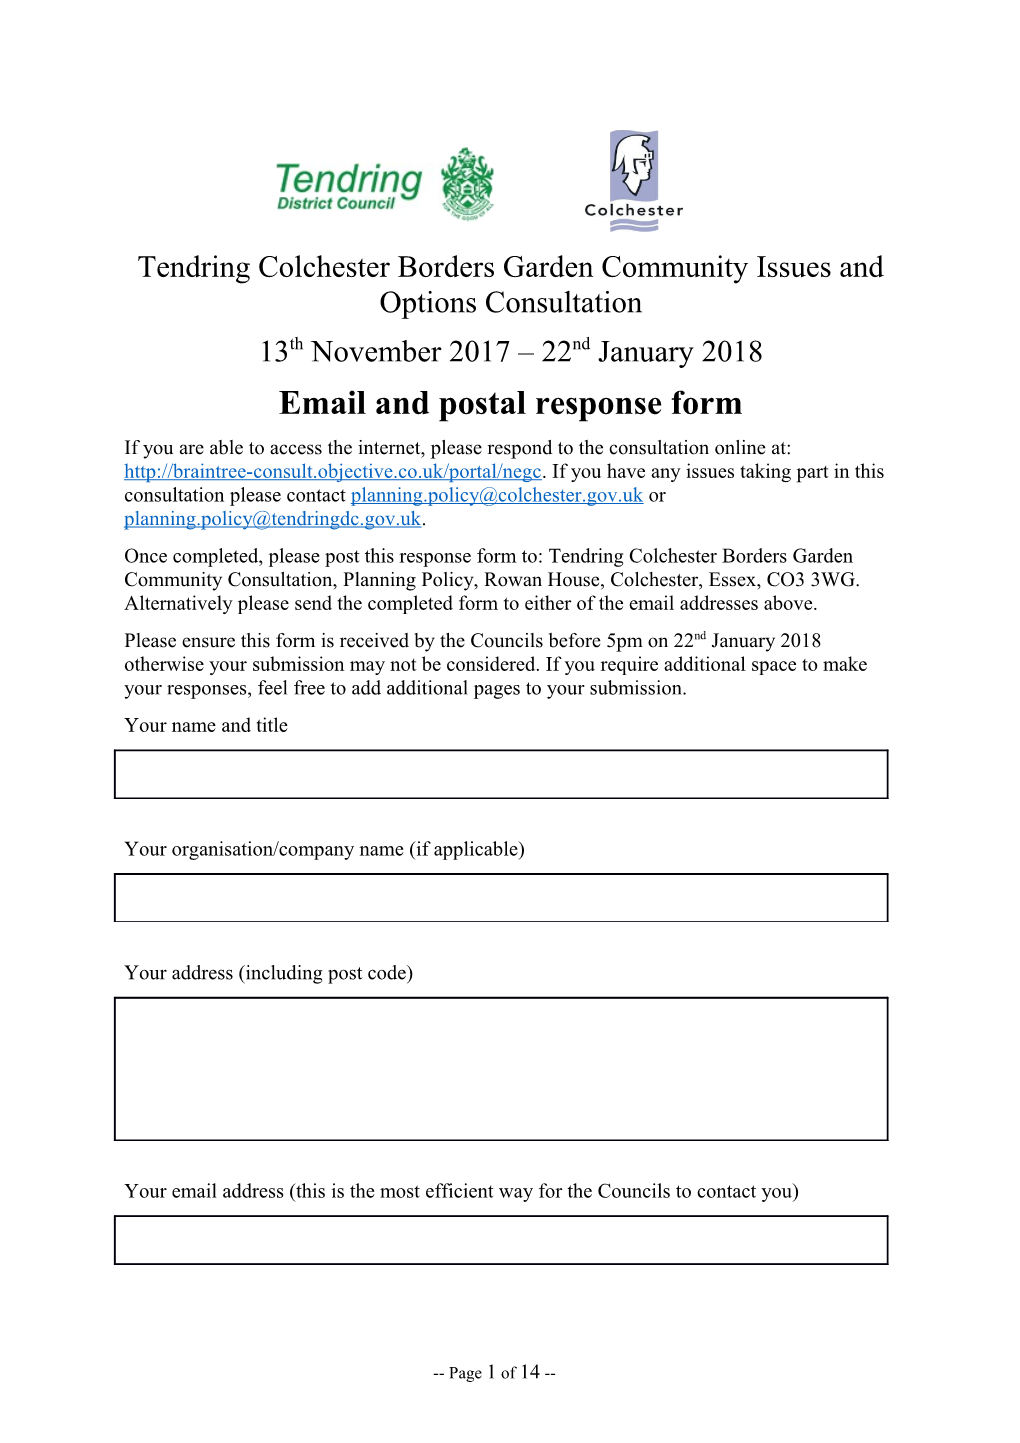 Tendring Colchester Borders Garden Community Issues and Options Consultation